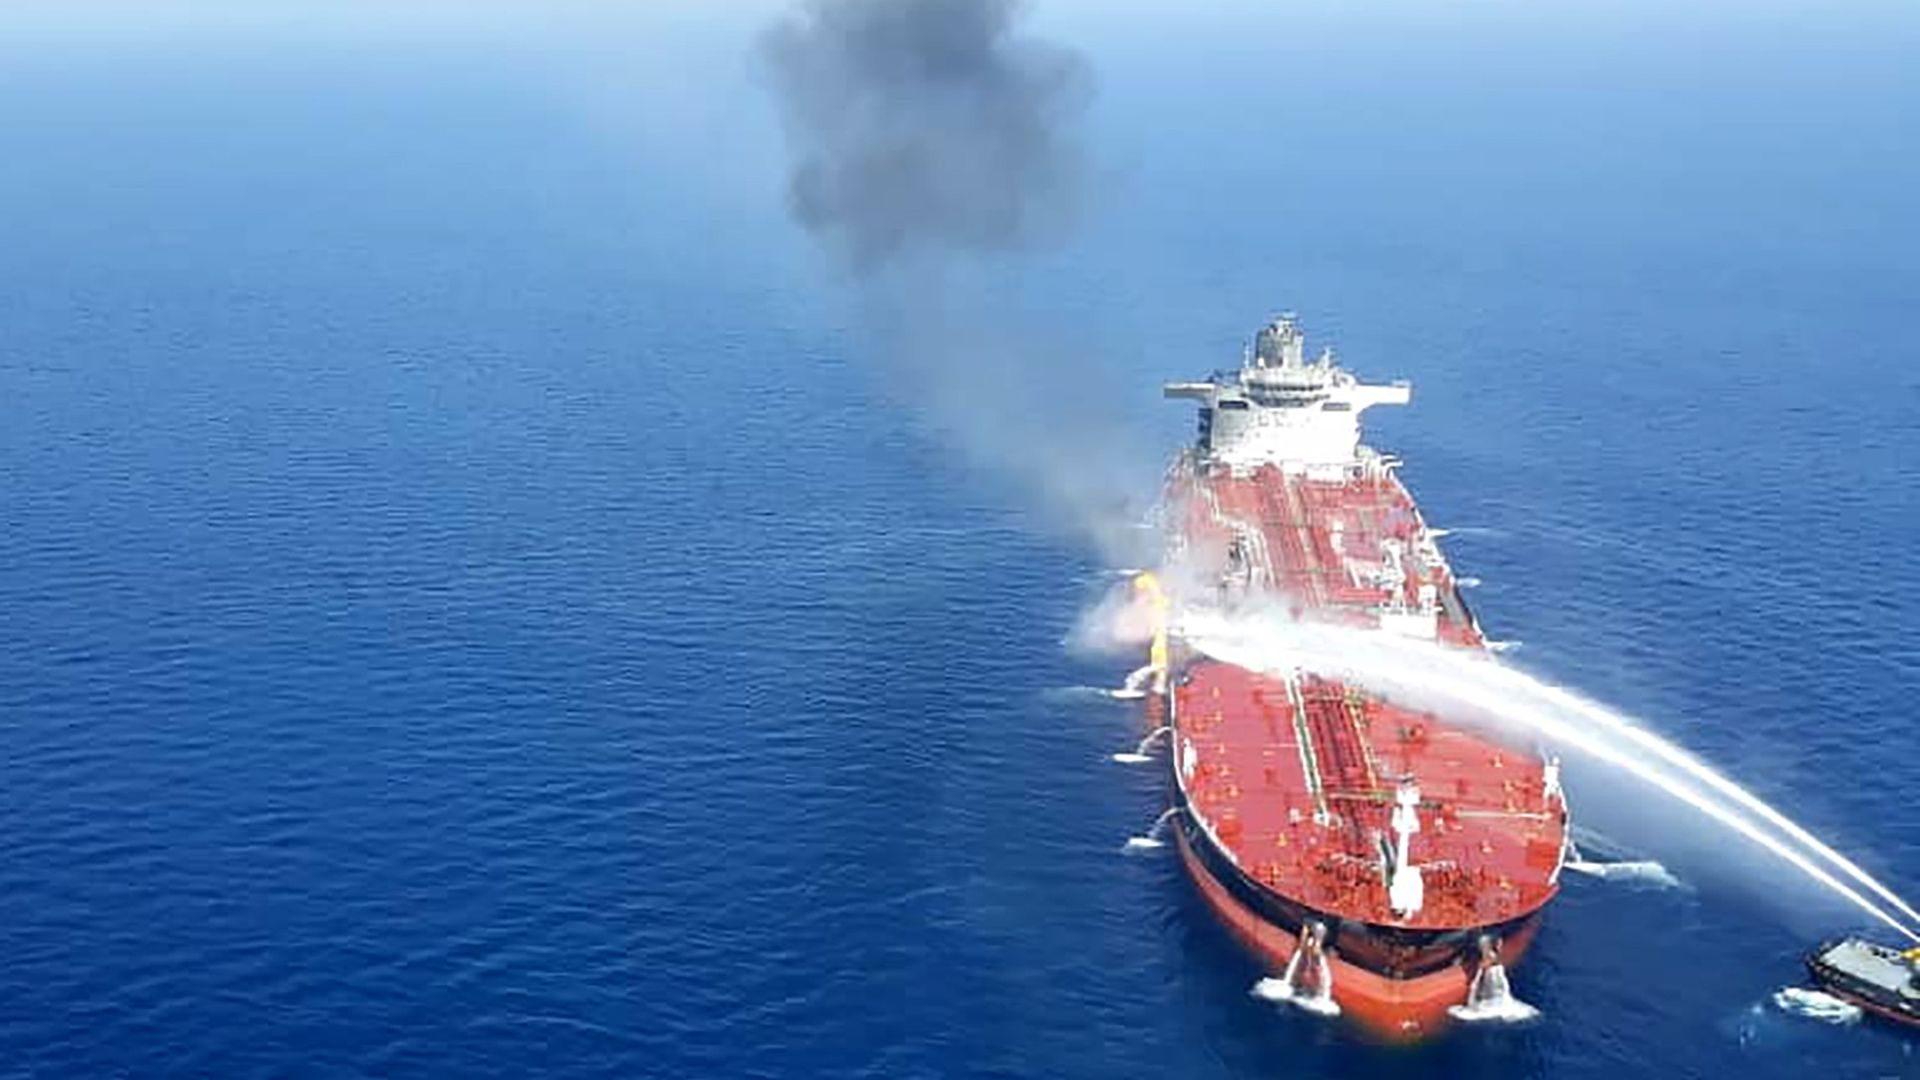 In this image, jets of water are shot onto a large oil tanker on the ocean.